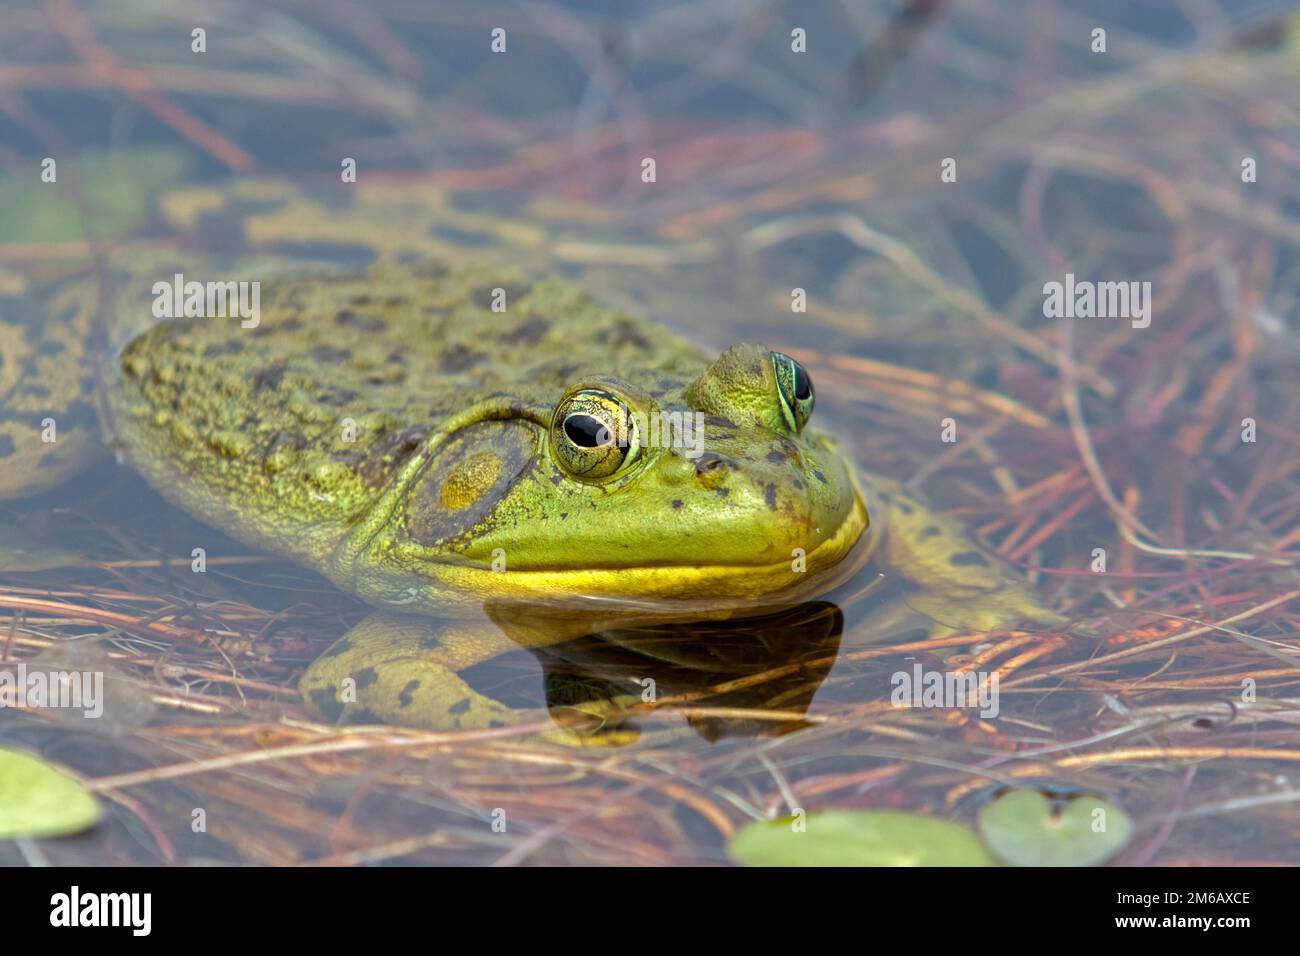 North american bull frog watching at the surface of a lake. Frog resting on aquatic vegetation. (Lithobates catesbeianus) Stock Photo